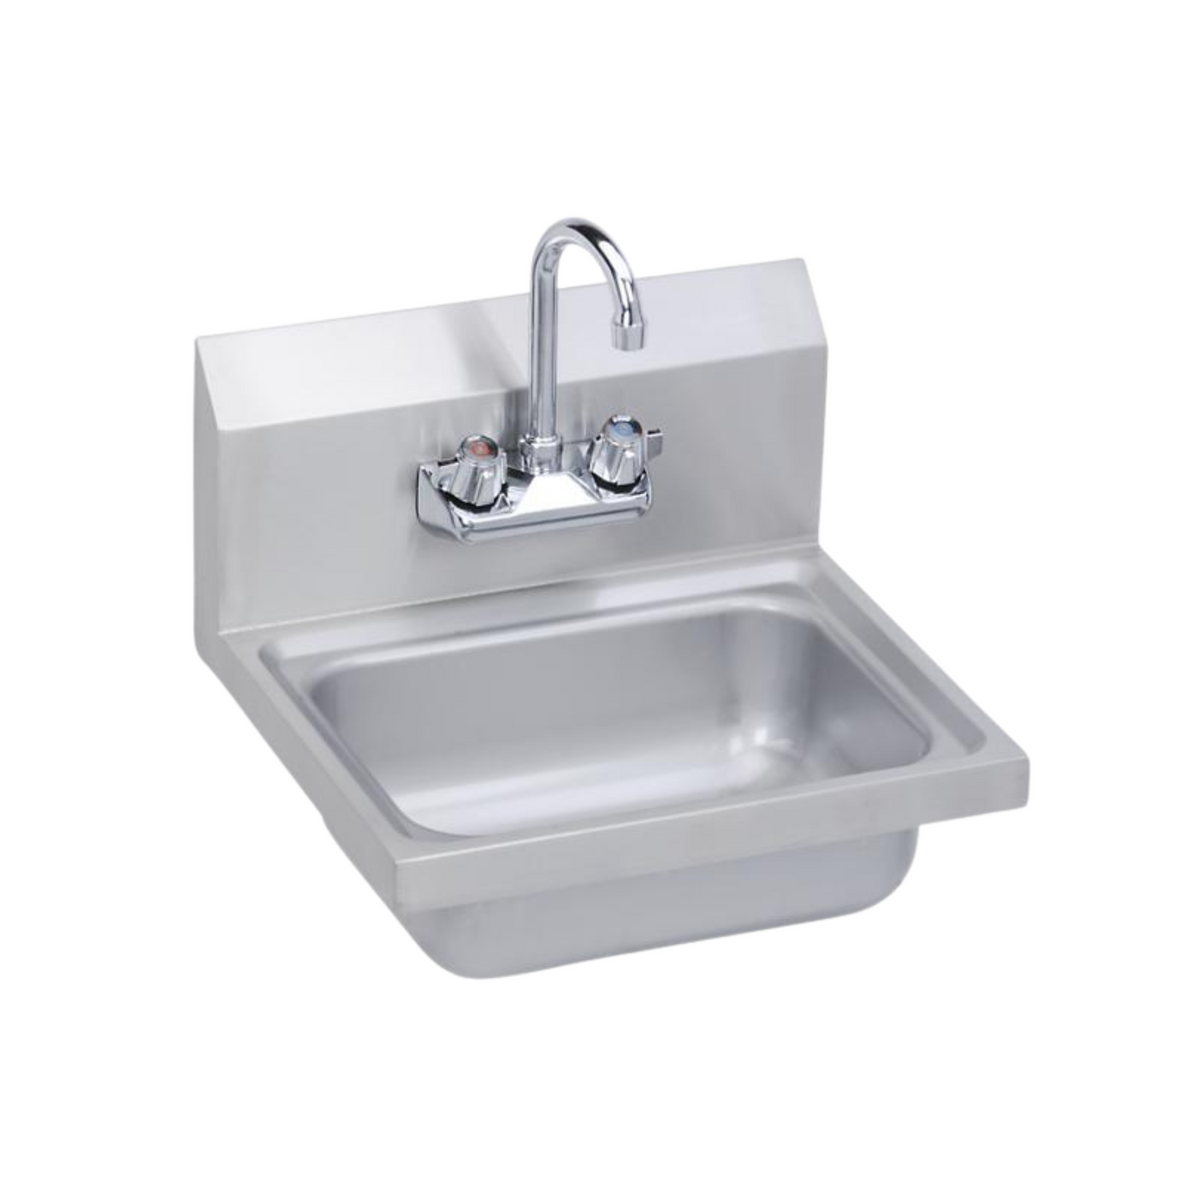 Elkay Stainless Steel 17" x 15" x 11" 20 Gauge Hand Sink with Faucet